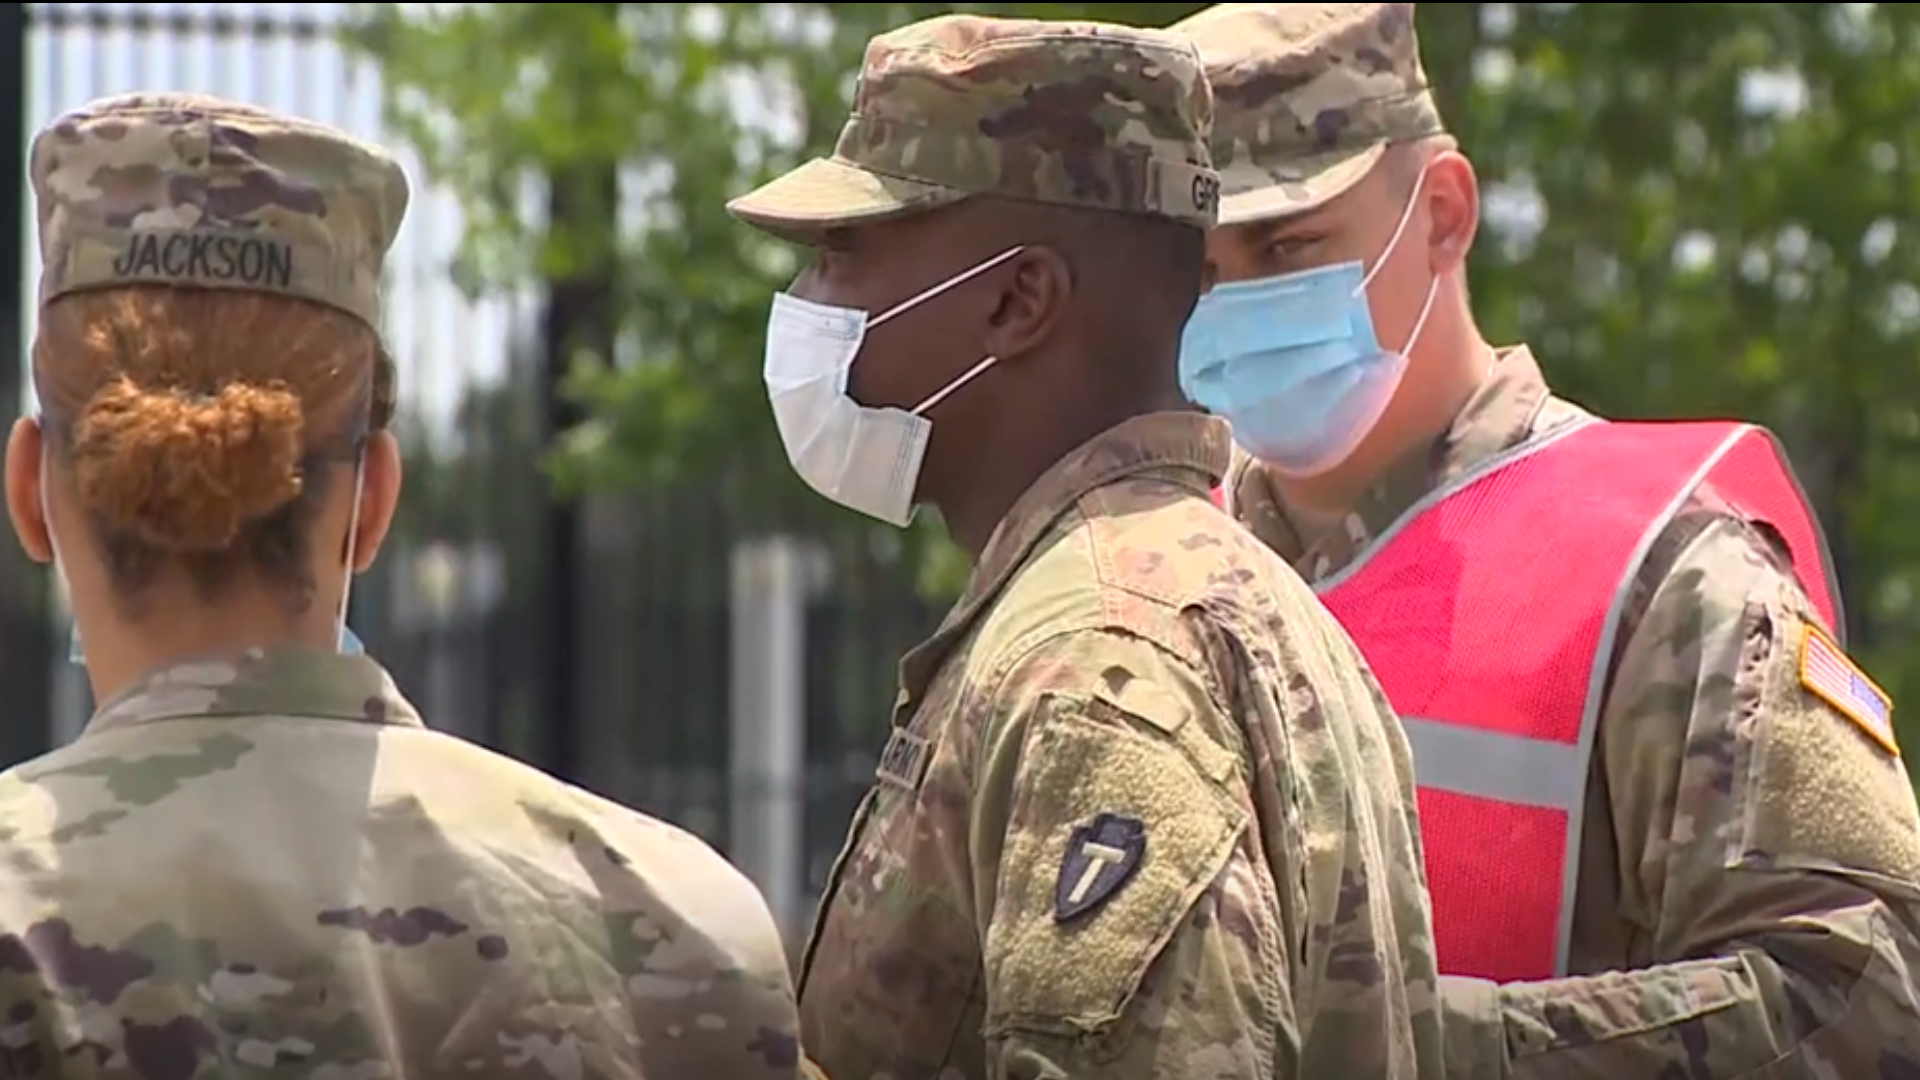 On May 8, The Texas National Guard will be in Bell county to assist with testing for those who believe they may have the virus.